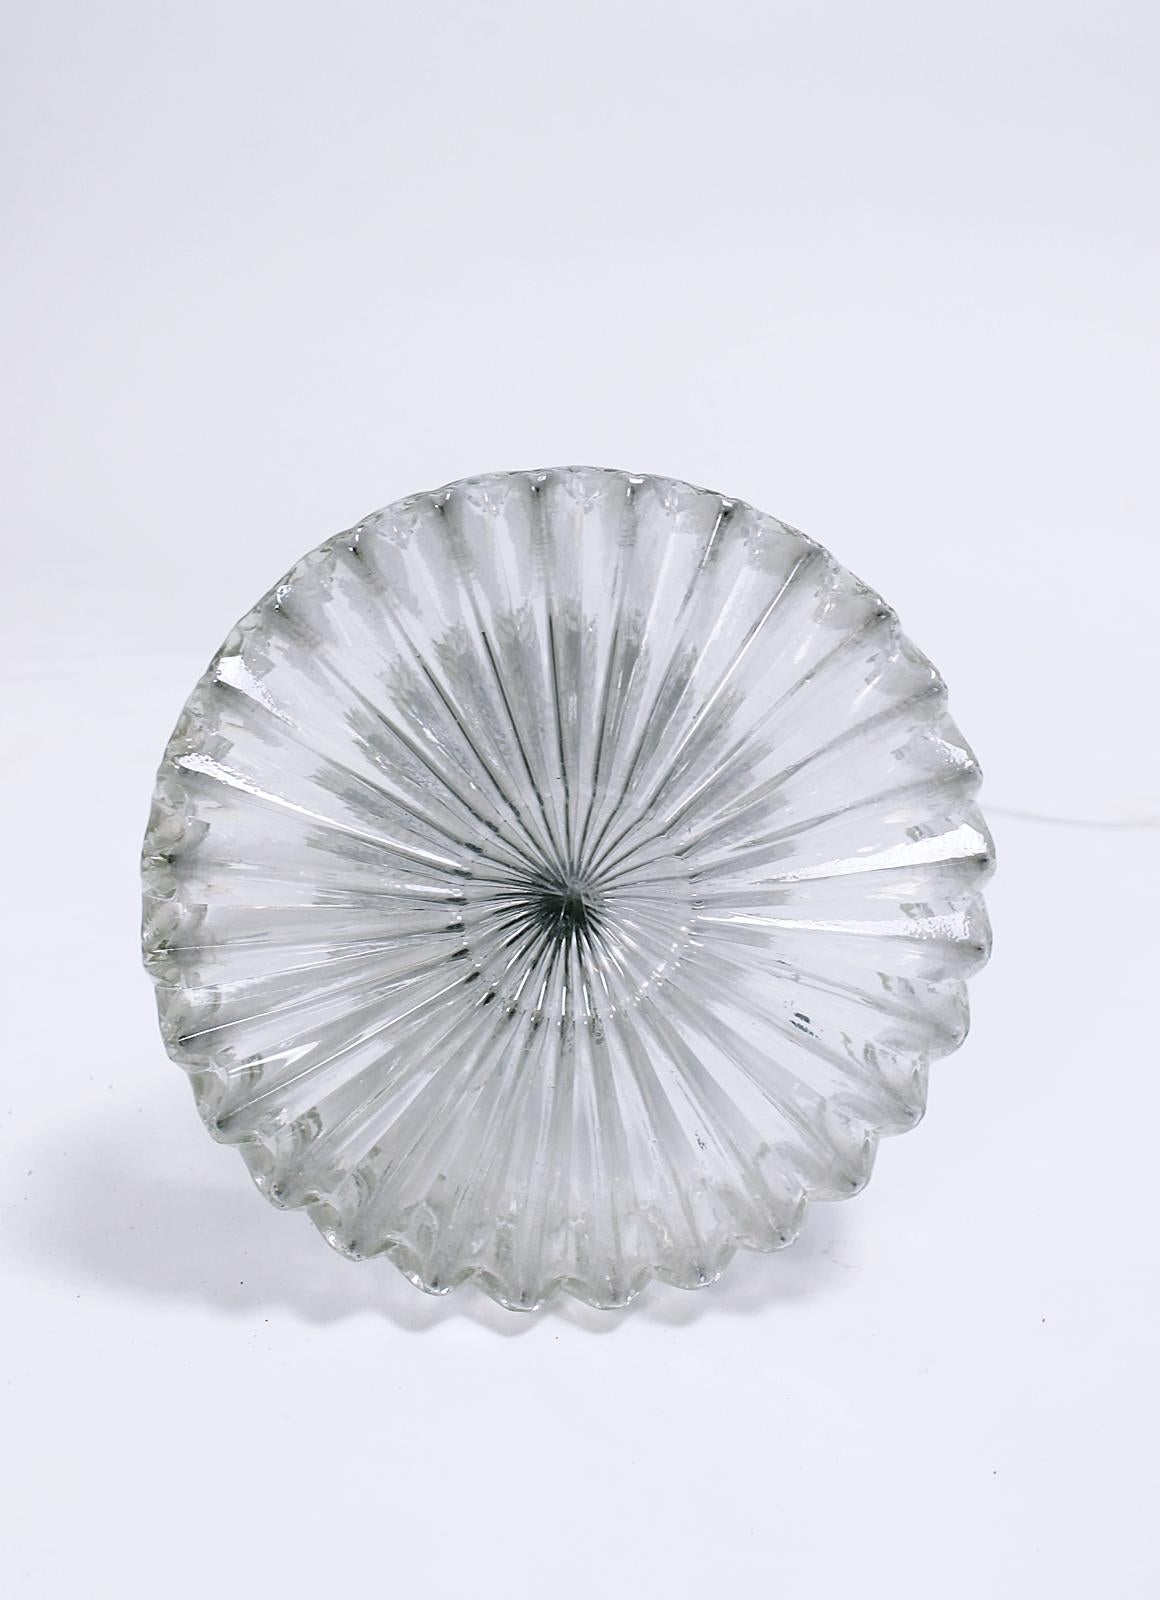 Metal Vintage Textured Glass Pendant Lamp Germany, 1950s For Sale